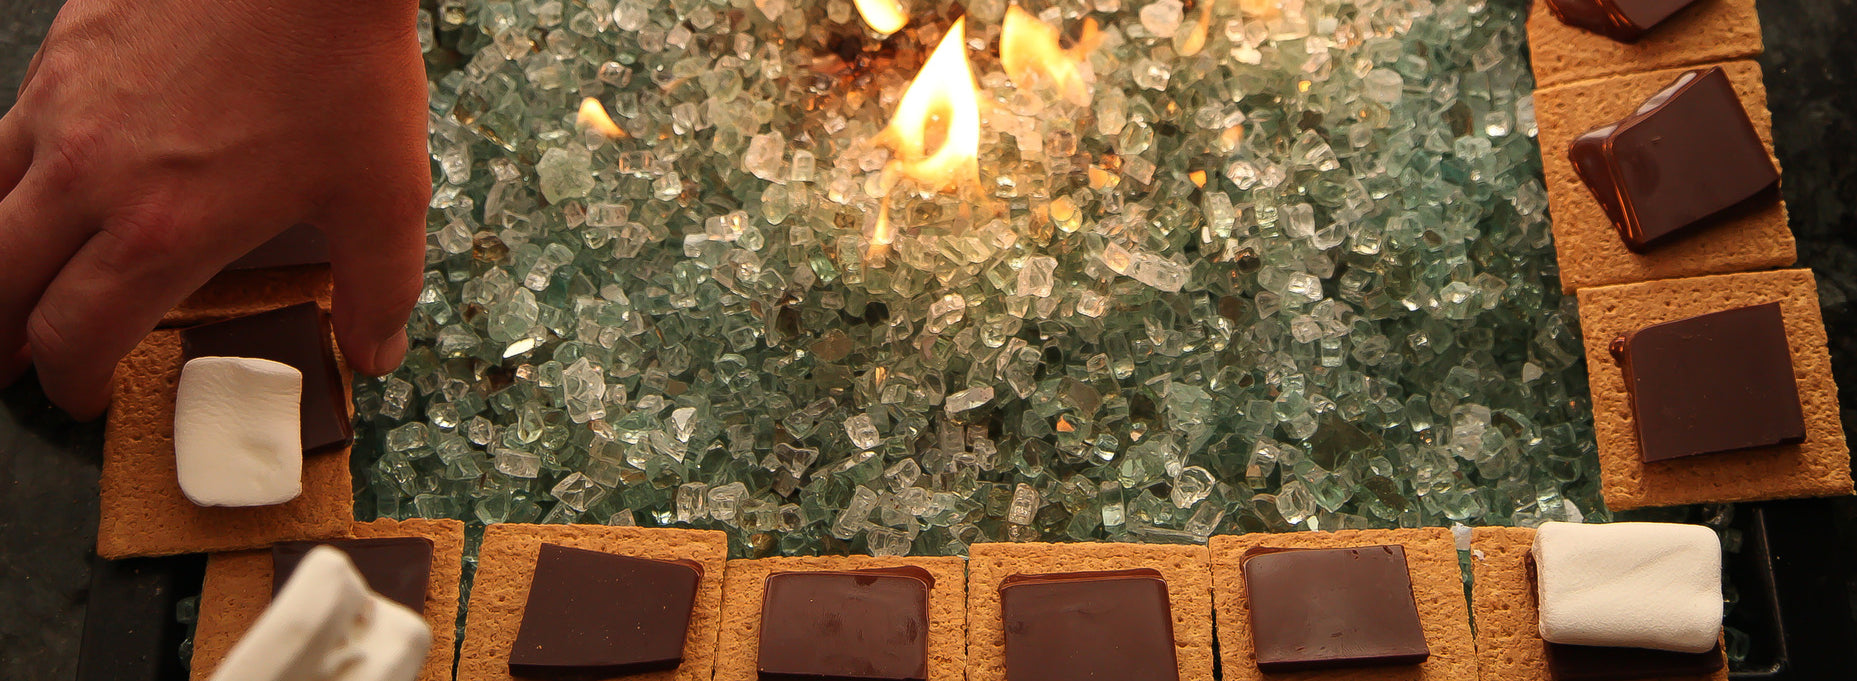 Firetainment Cooking Package Smores